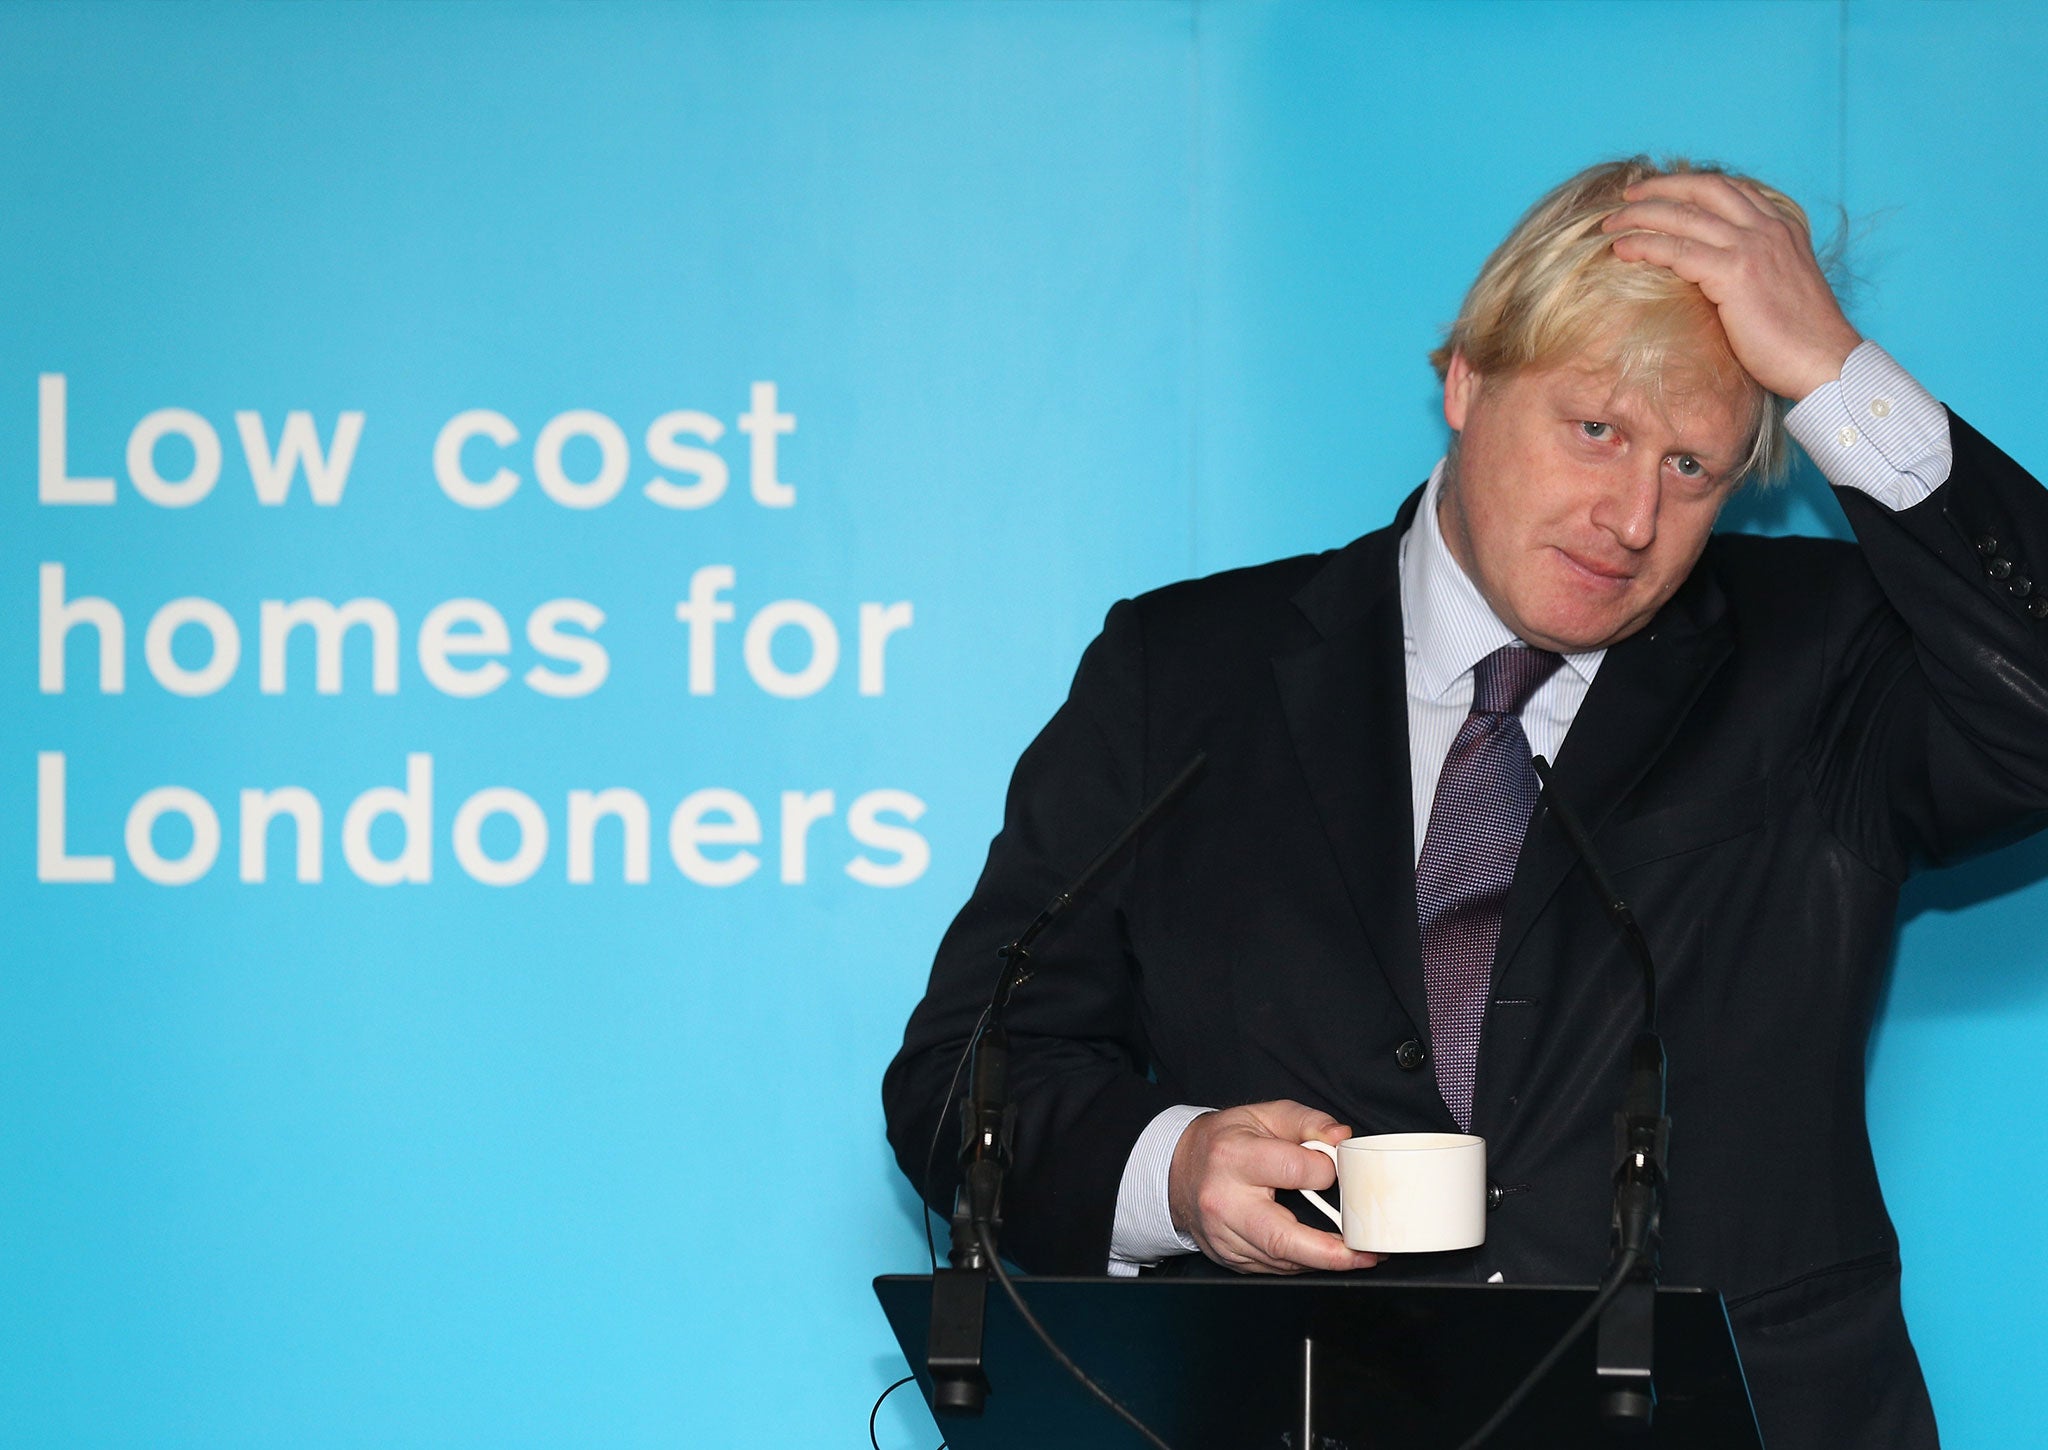 Boris Johnson has been criticised for how many luxury apartments he has approved as Mayor of London